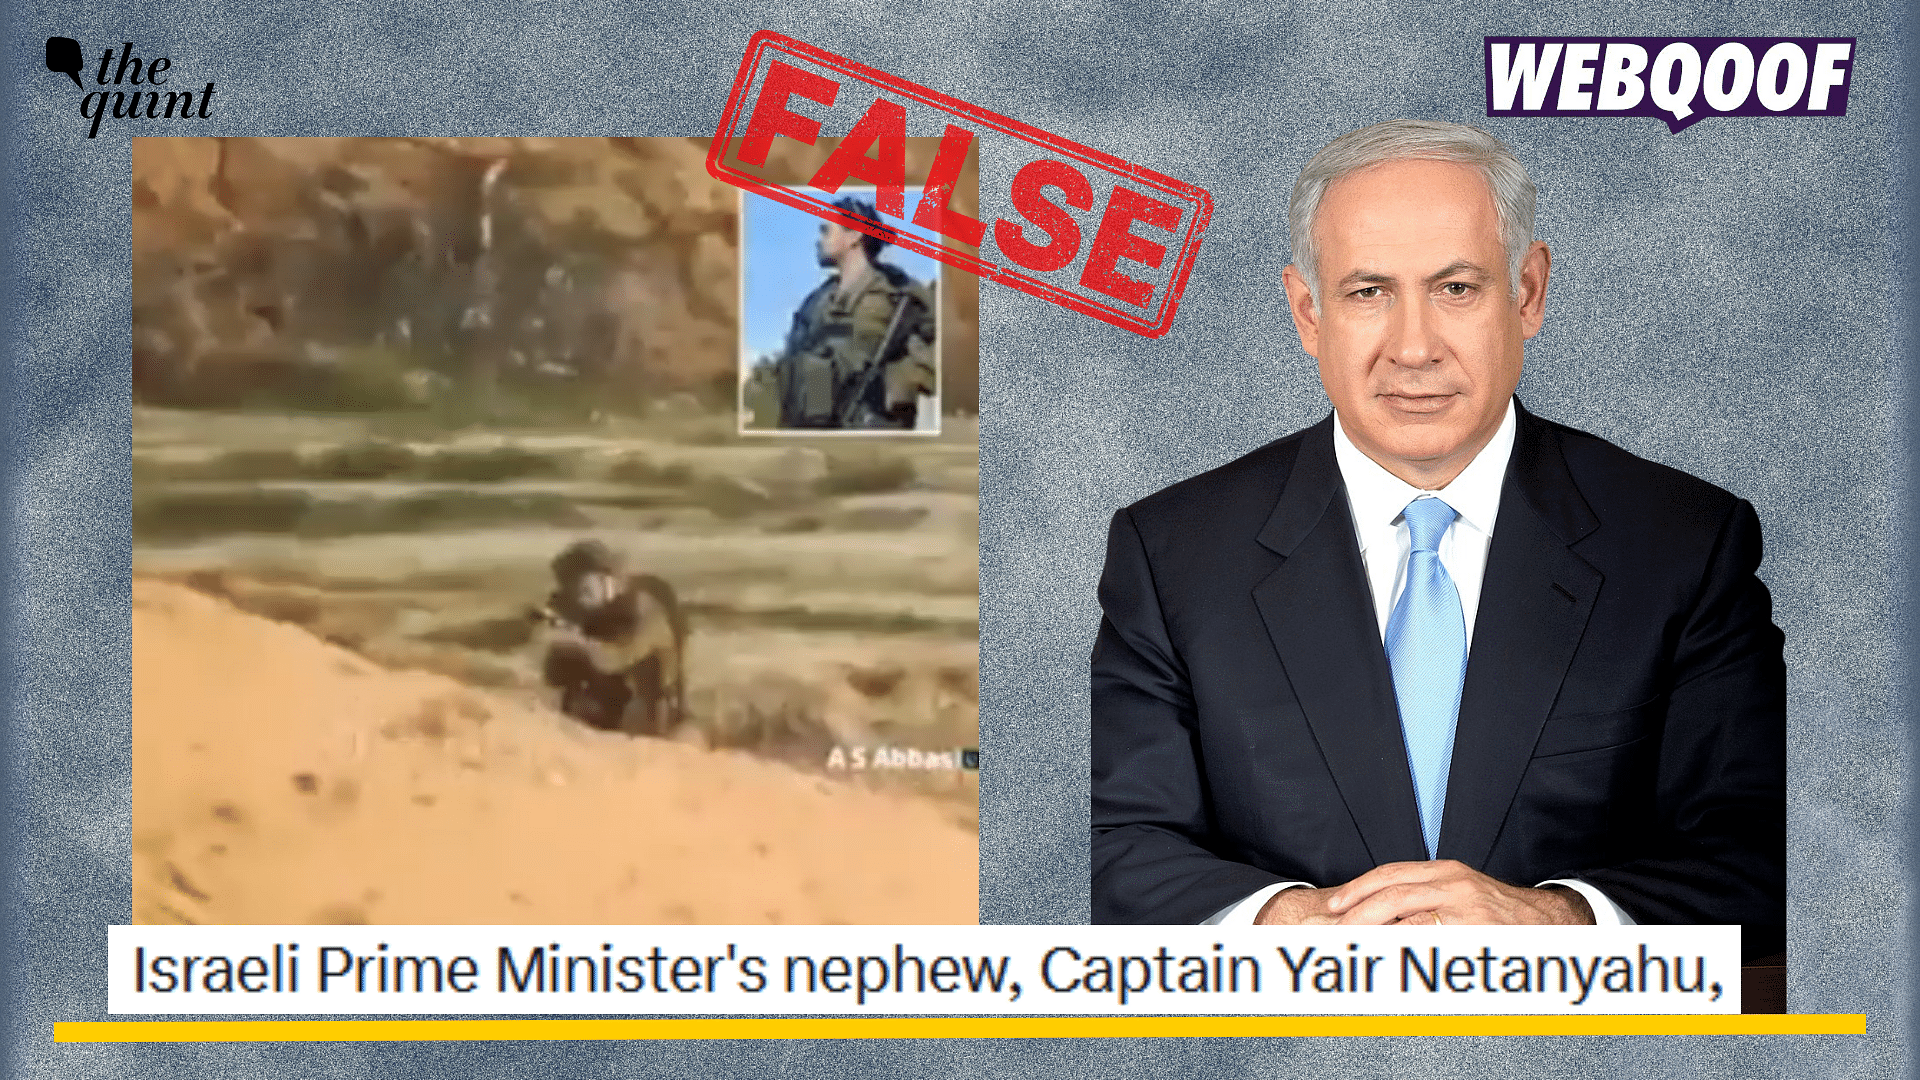 <div class="paragraphs"><p>Fact-Check:  An old video of a soldier being shot at in going viral as recent one with a false claim that it shows Israeli PM Benjamin Netanyahu's nephew.</p></div>